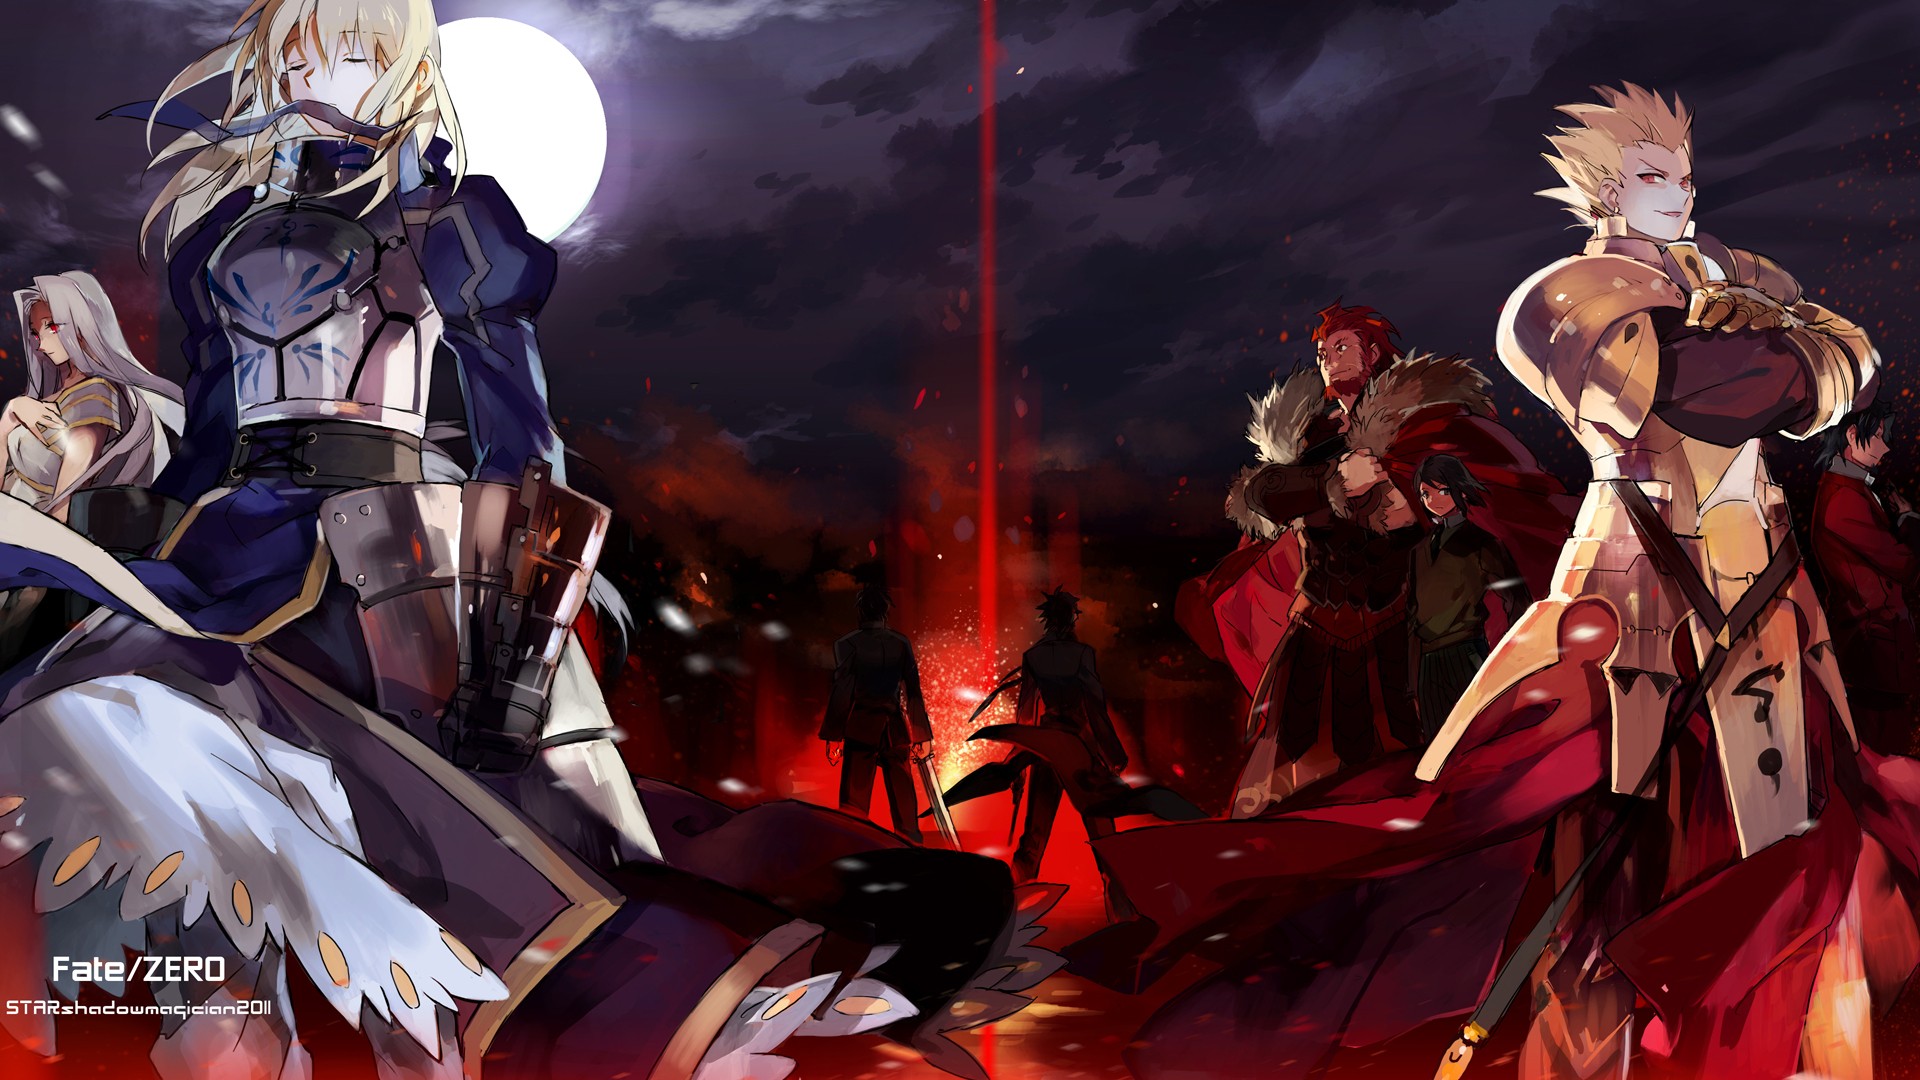 10 Best images about Fate Stay Night on Pinterest | Gilgamesh fate